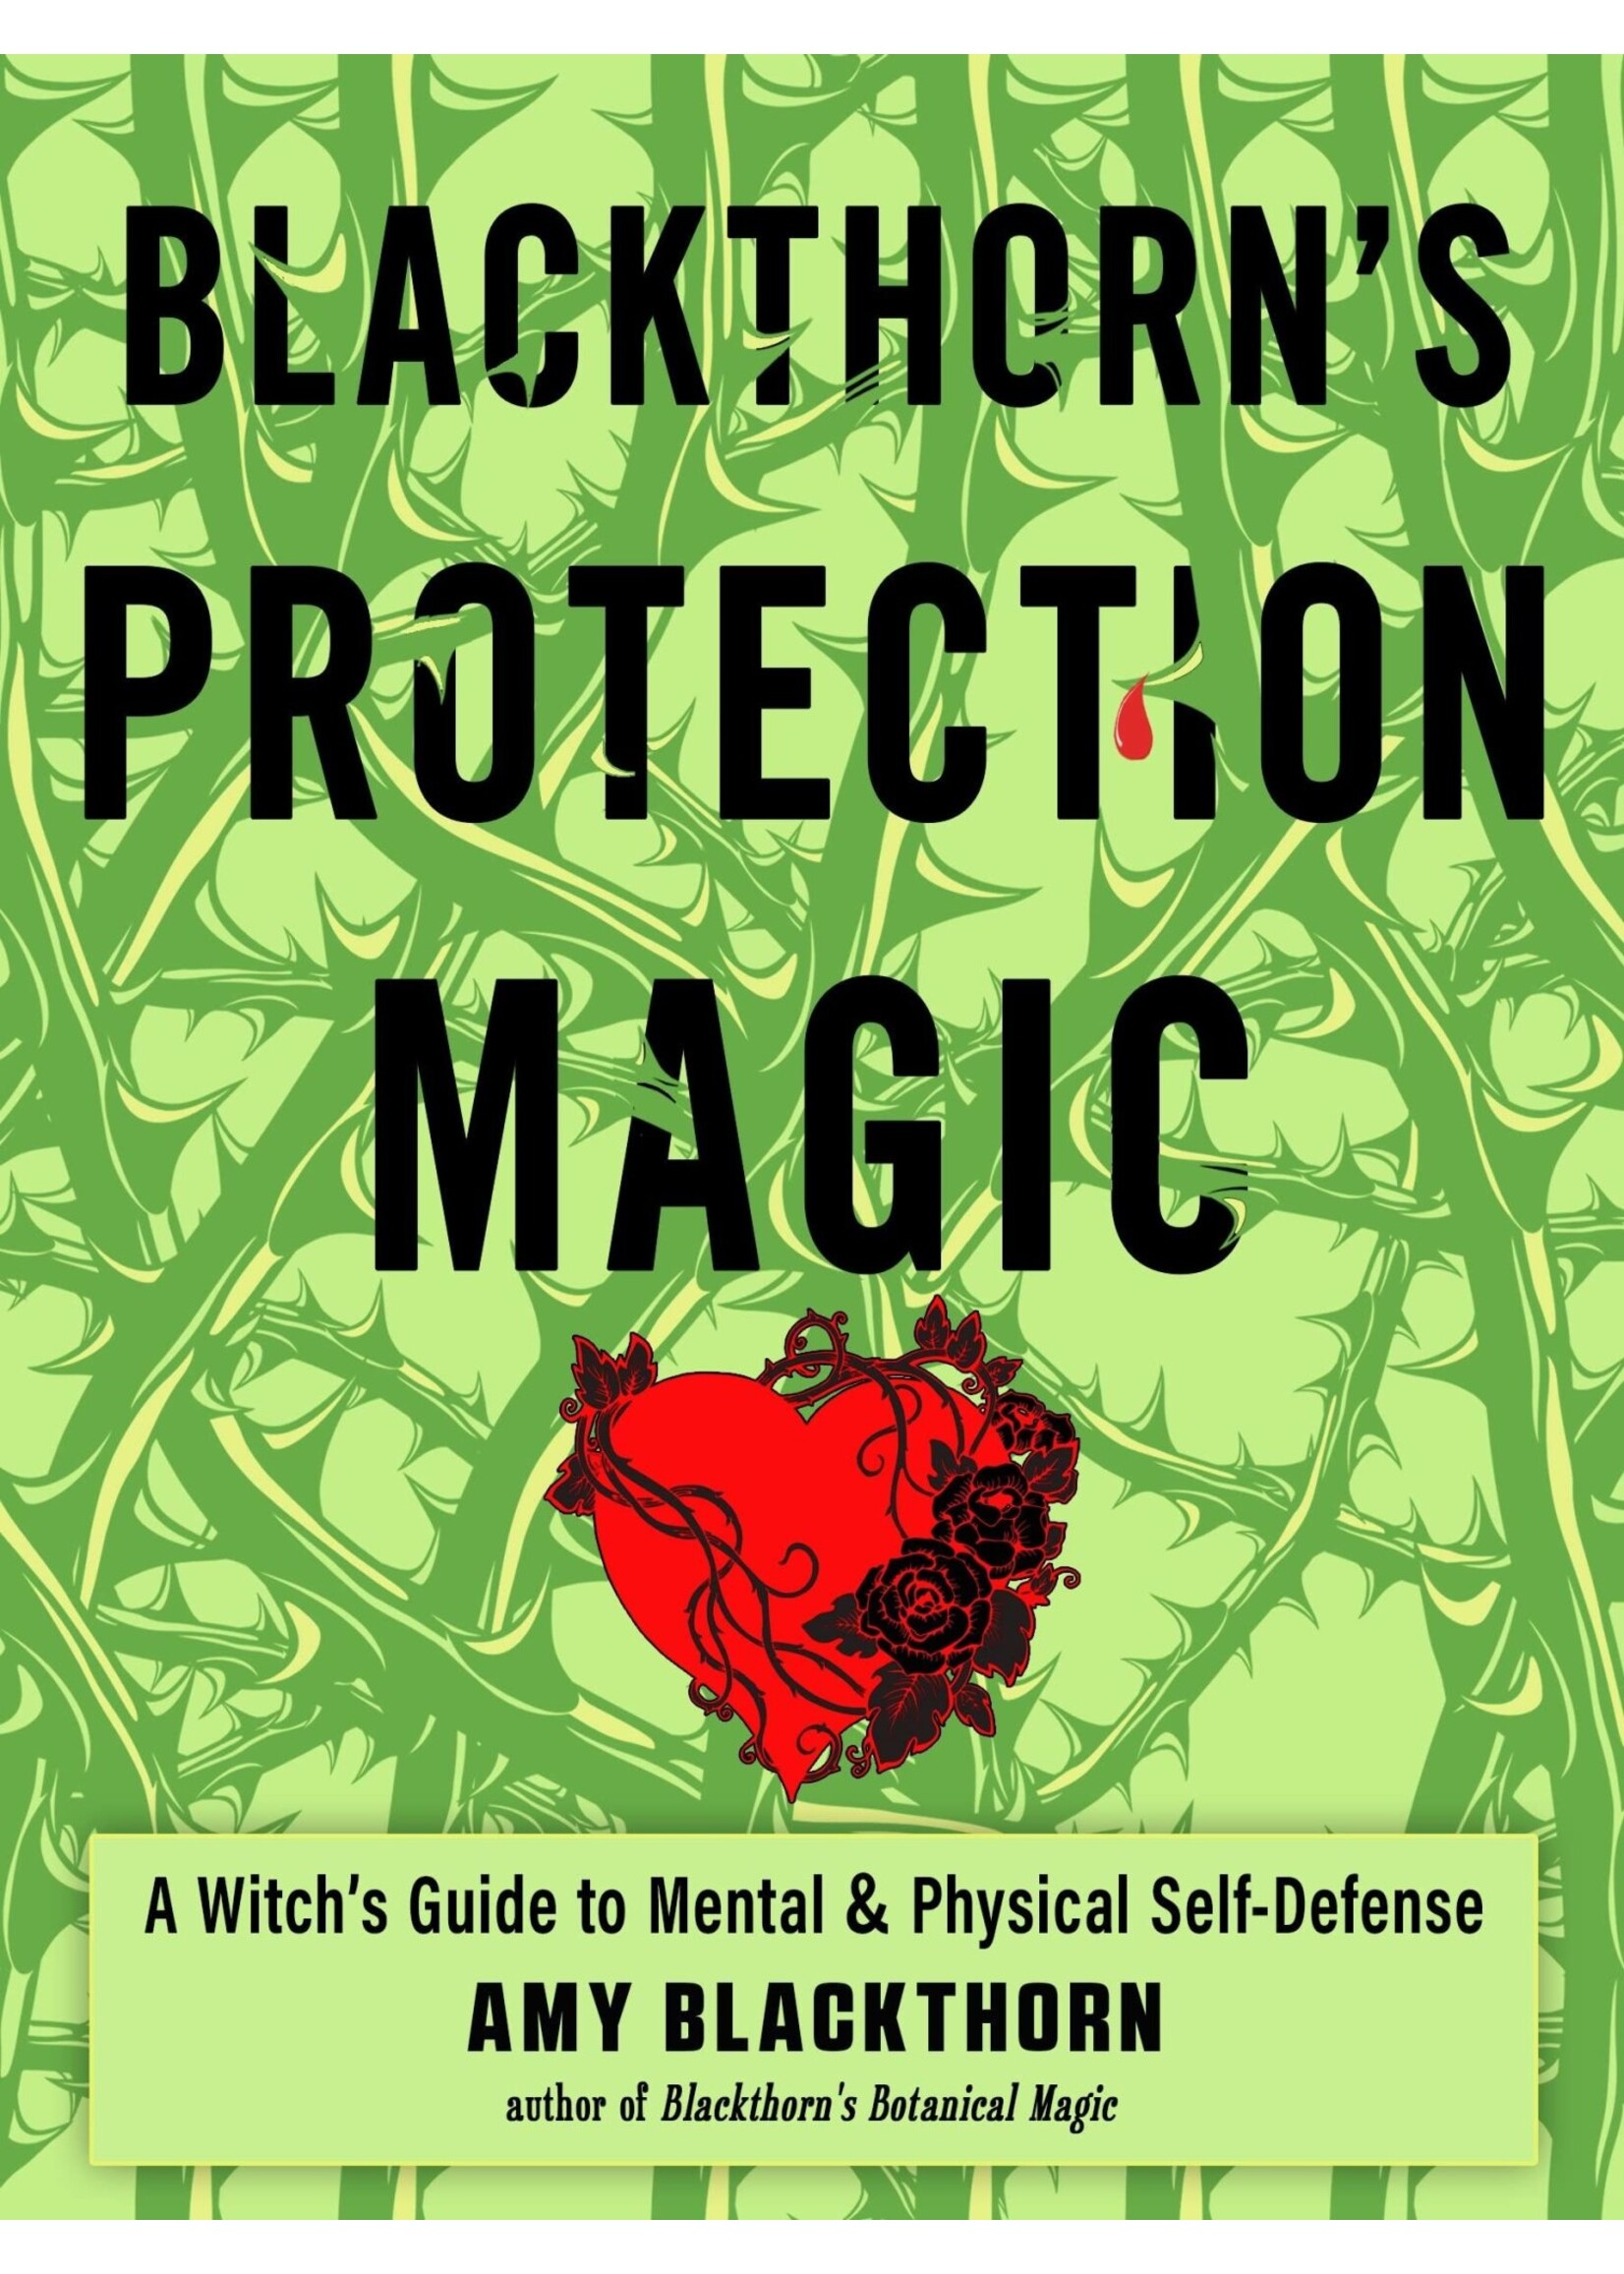 Blackthorn's Protection Magic